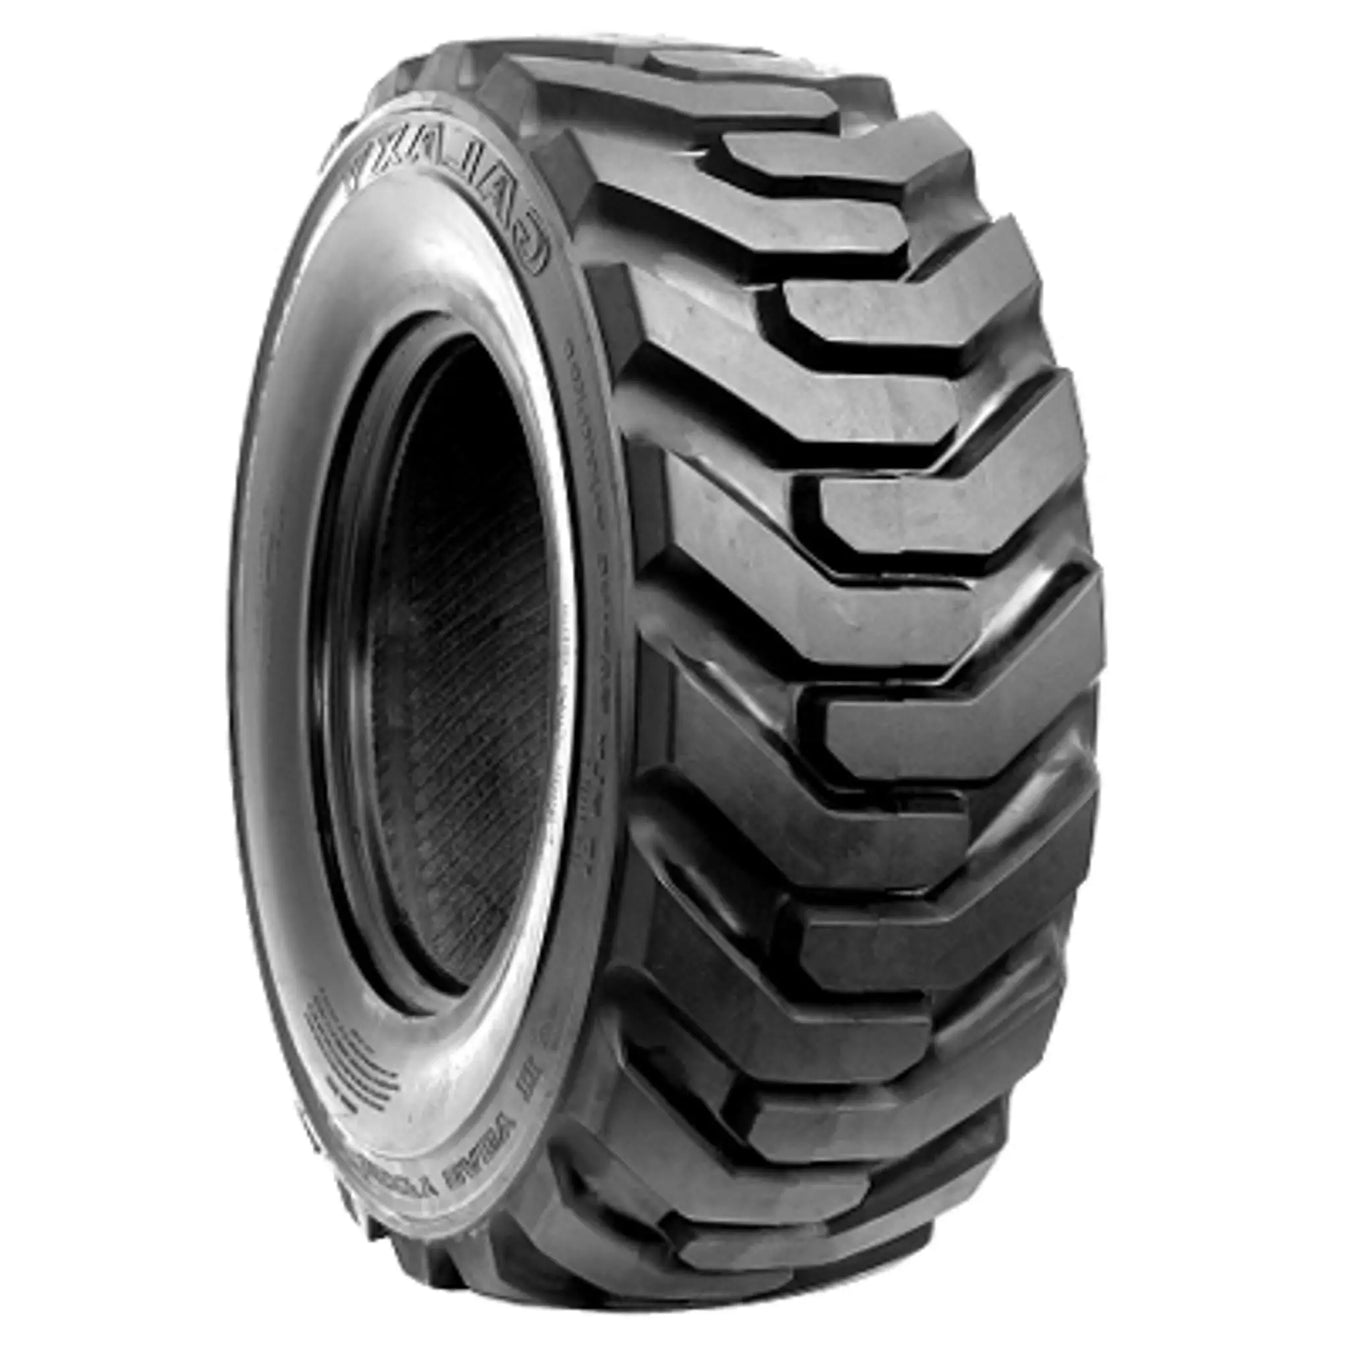 Skid Steer Tires - Pneumatic Tire Size - 12.5/80-18